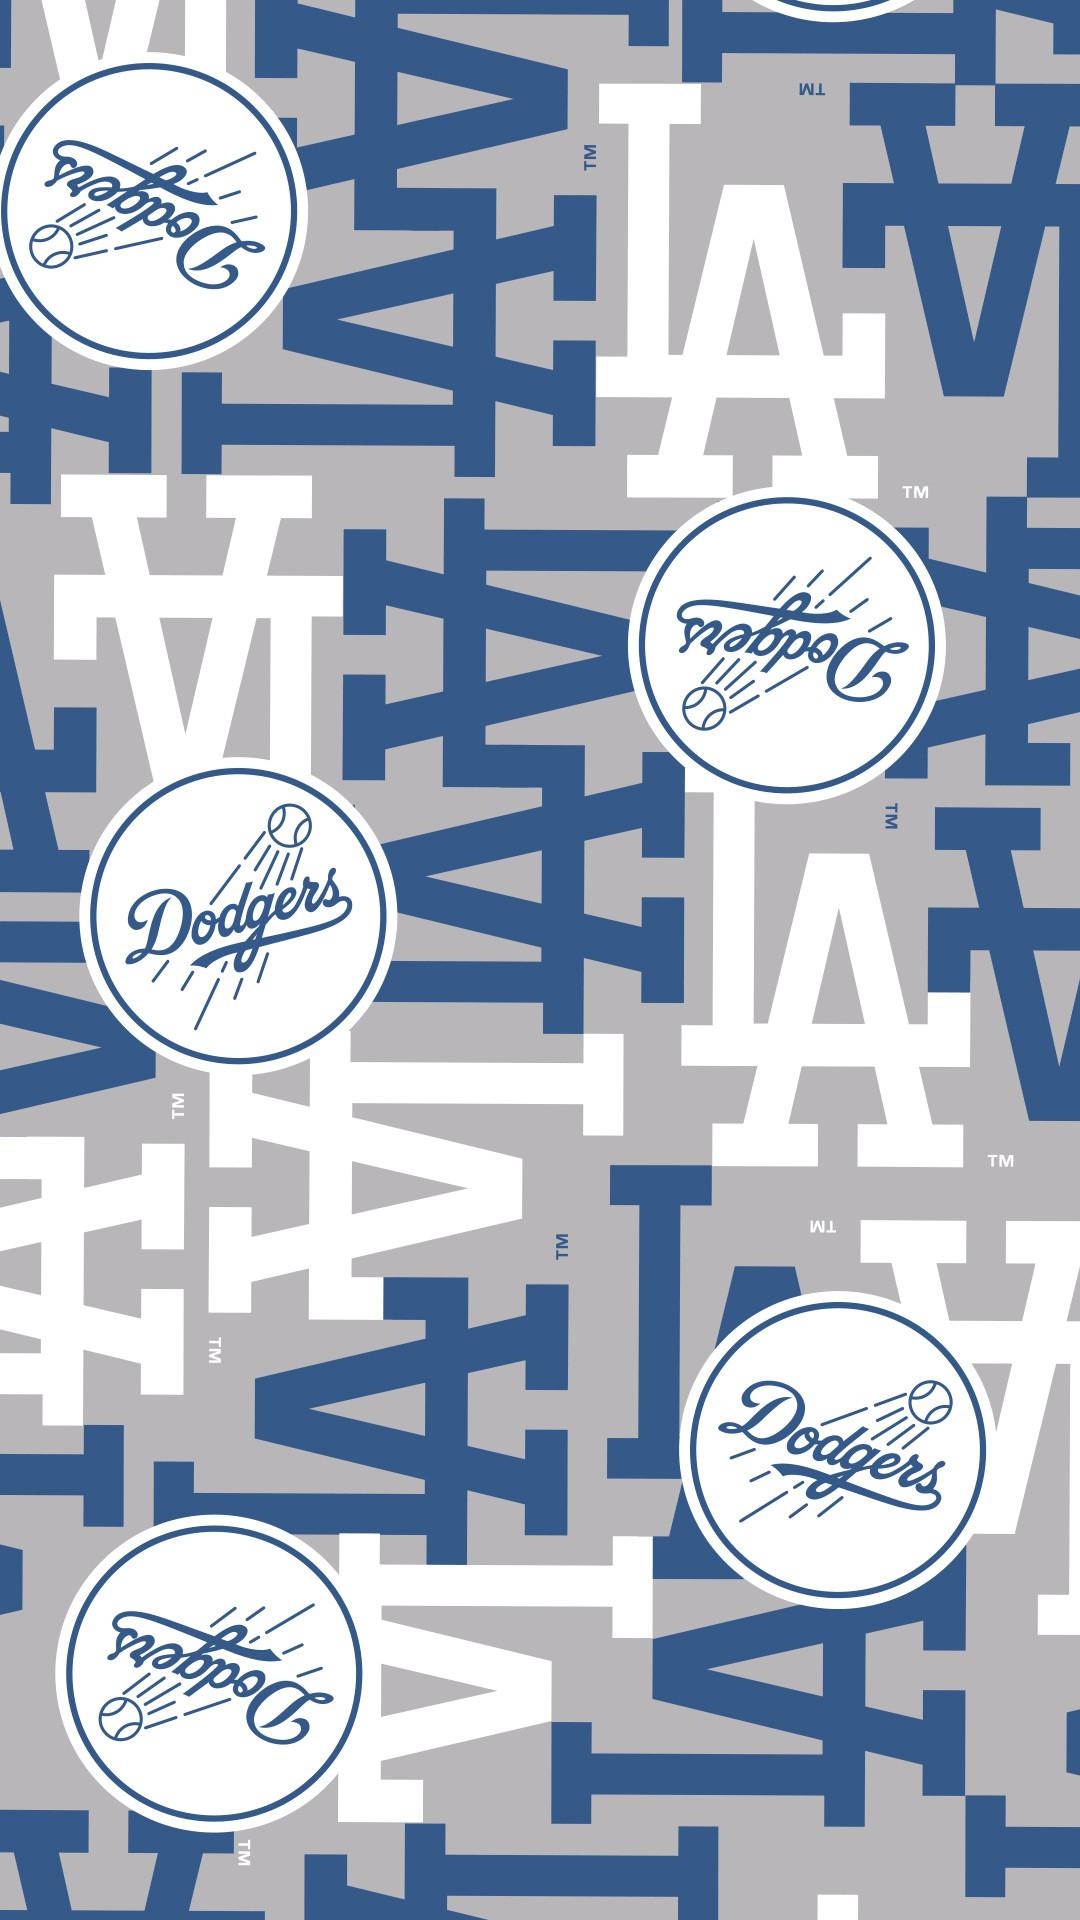 Dodgers iPhone wallpapers, Sports team pride, High-quality visuals, Dynamic gameplay, 1080x1920 Full HD Handy